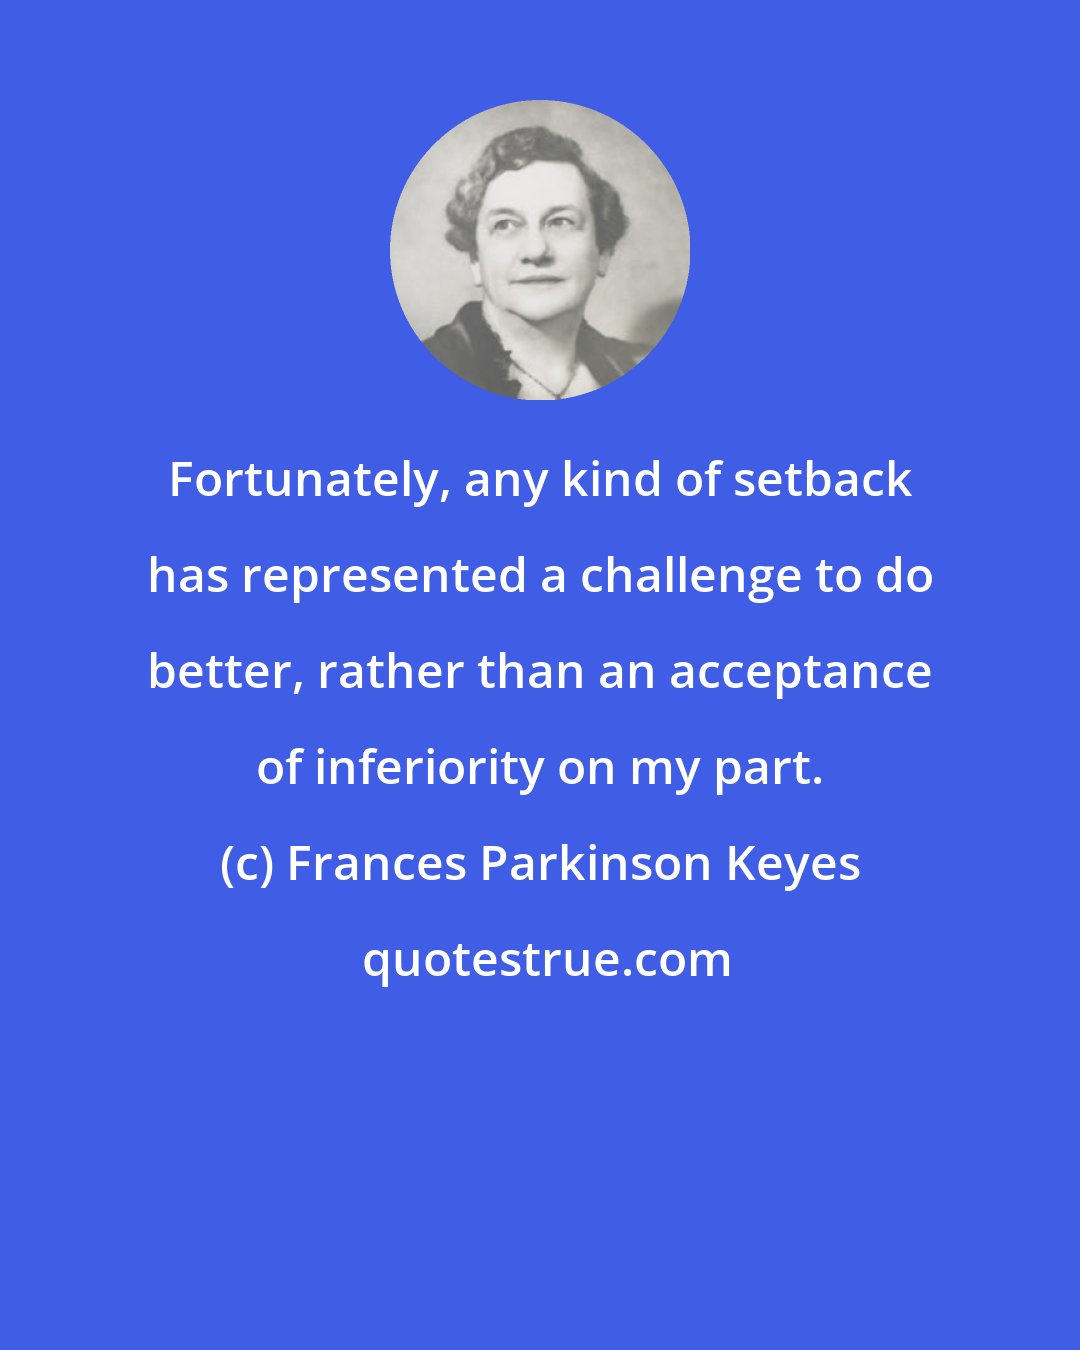 Frances Parkinson Keyes: Fortunately, any kind of setback has represented a challenge to do better, rather than an acceptance of inferiority on my part.